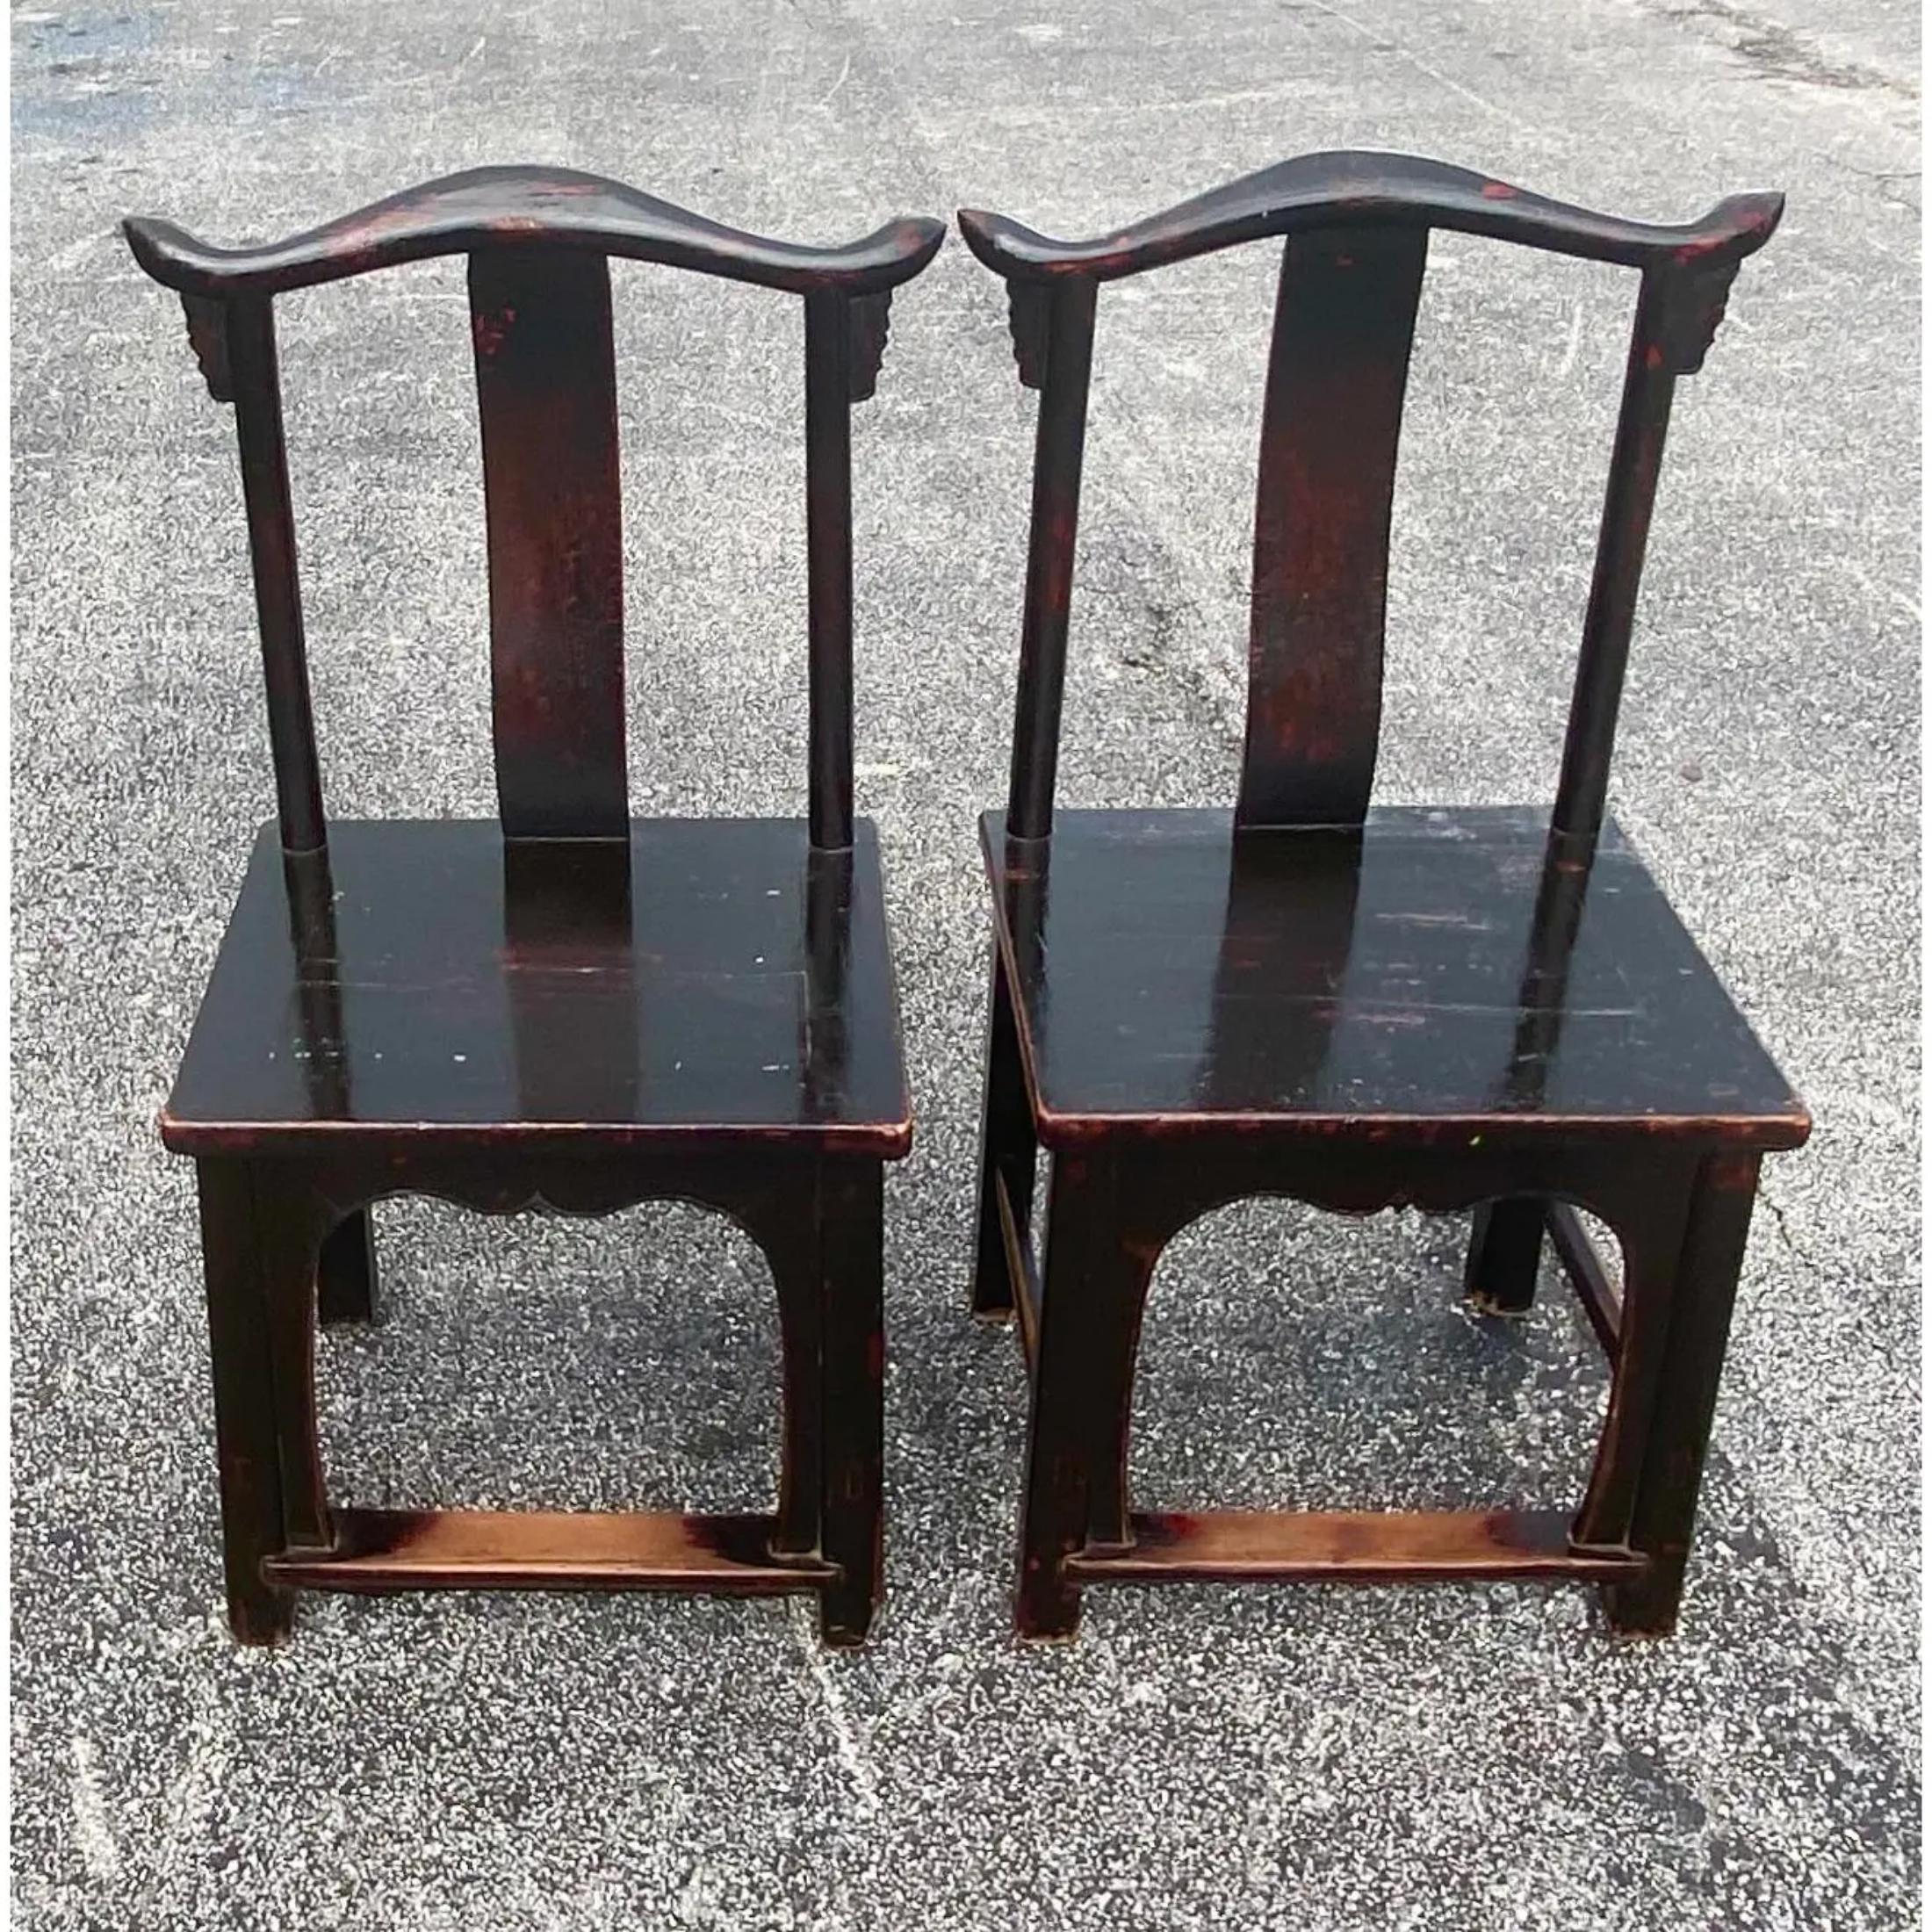 Fabulous pair of Asian emperor chairs. Dark brown with red undertones and a high holds finish. Acquired from a NY